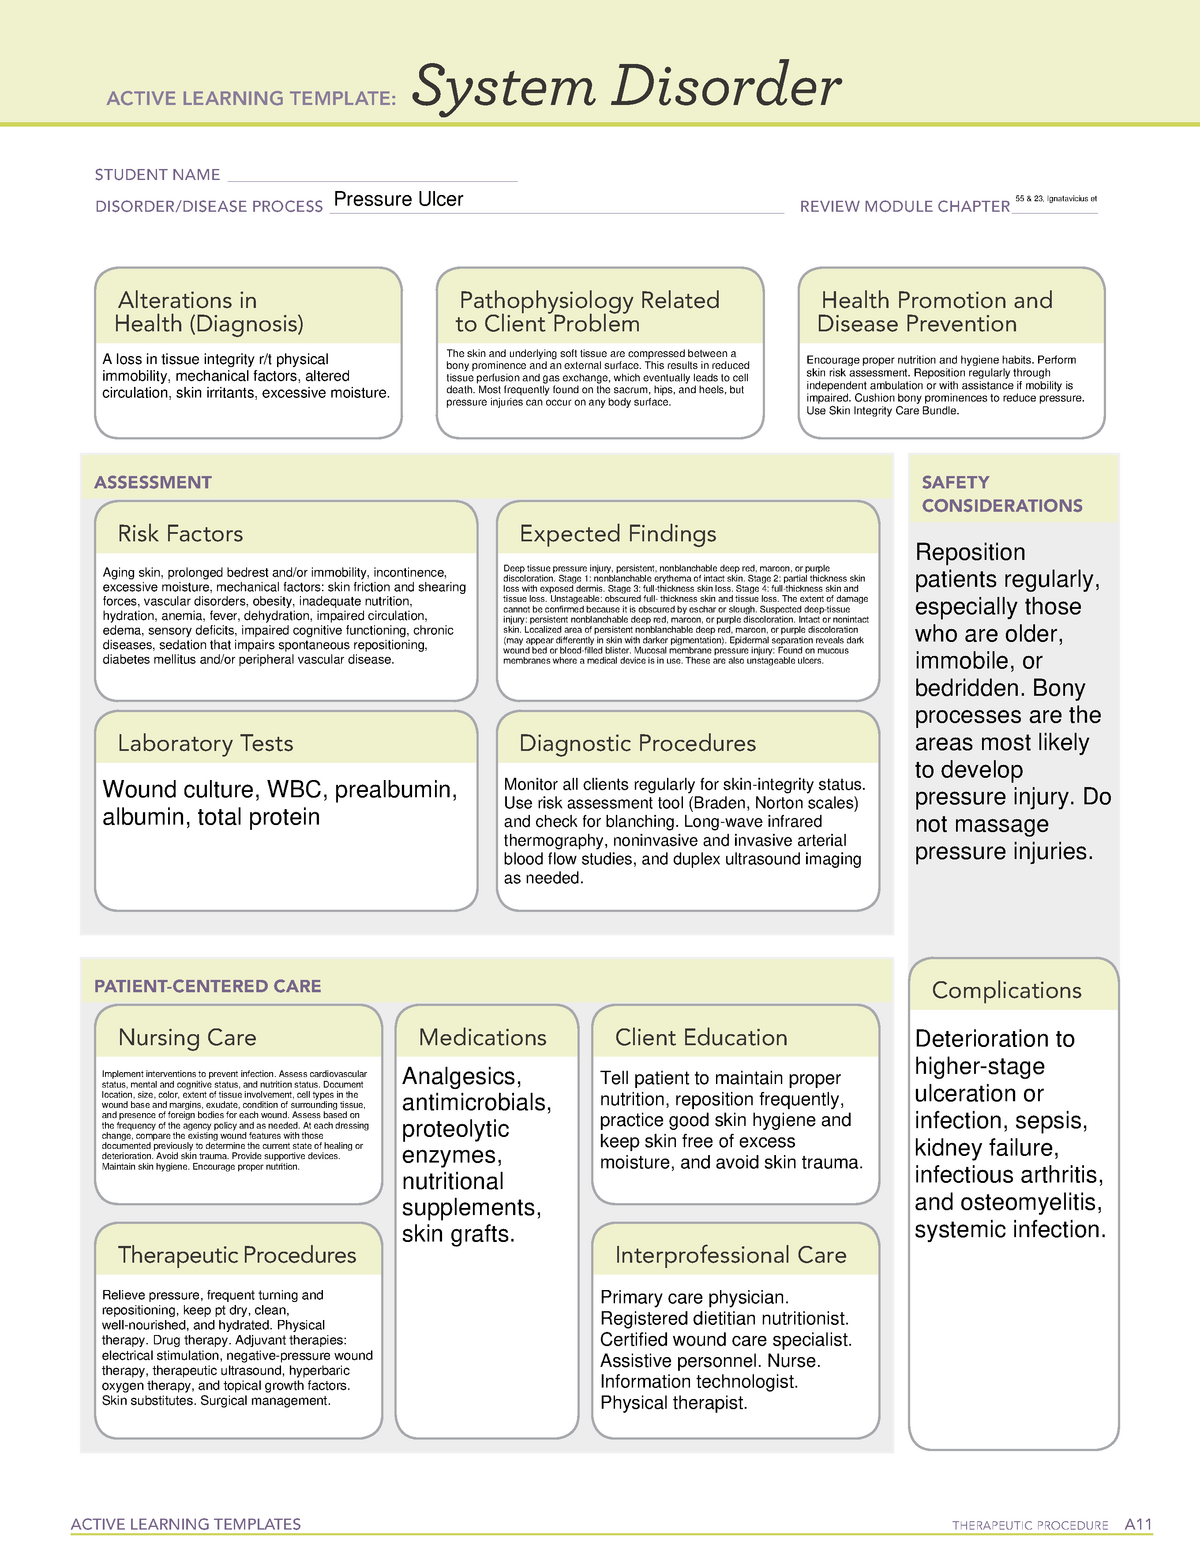 pressure-ulcer-system-disorder-template-active-learning-templates-vrogue